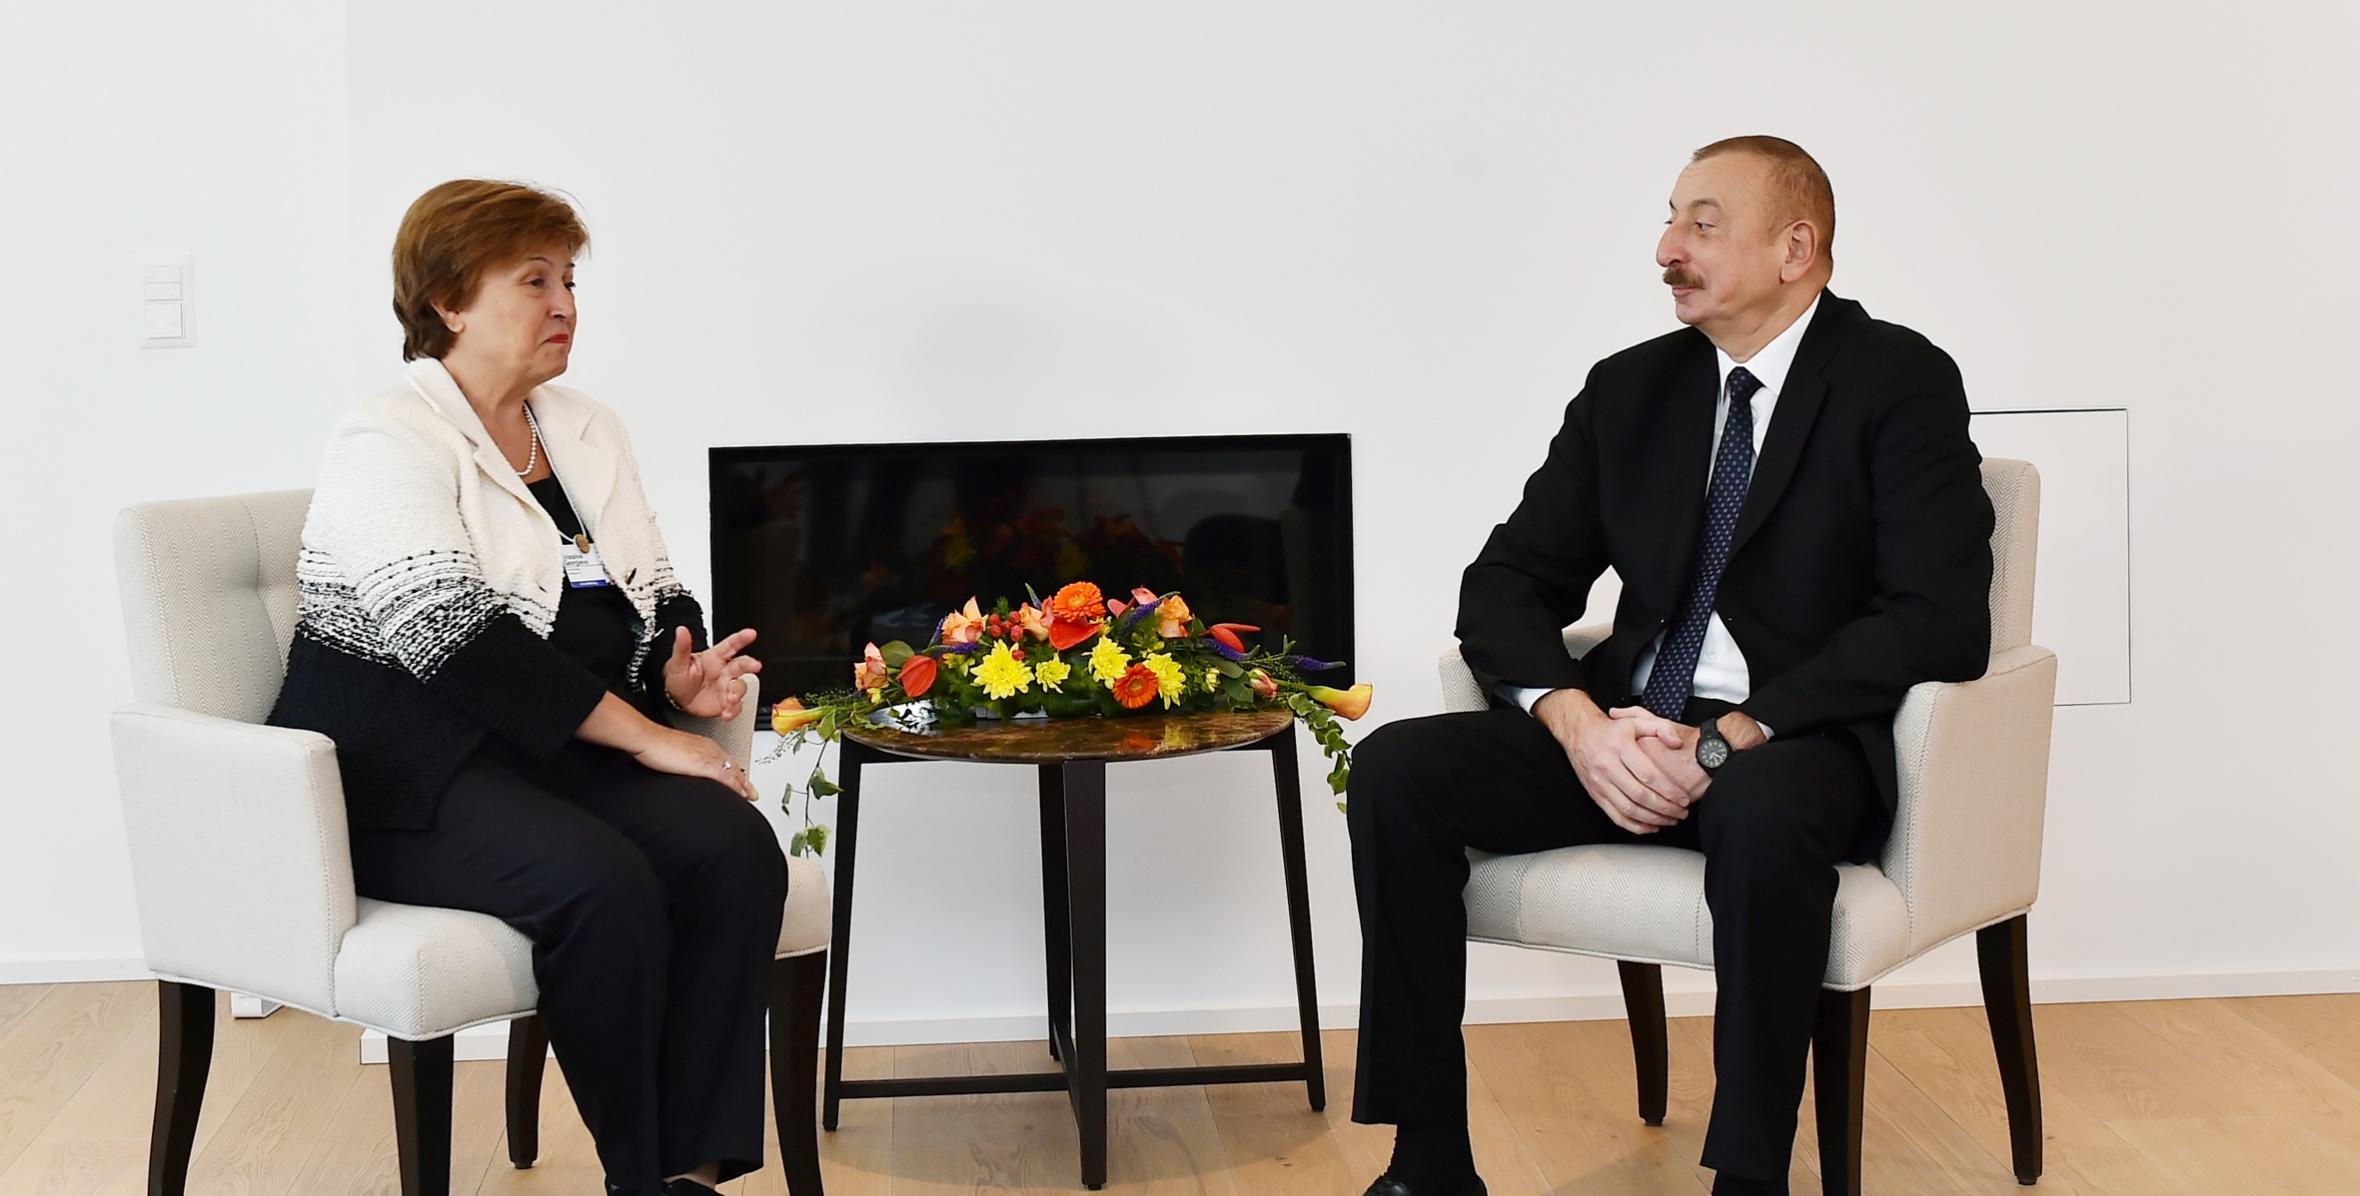 Ilham Aliyev met with Chief Executive Officer for World Bank in Davos